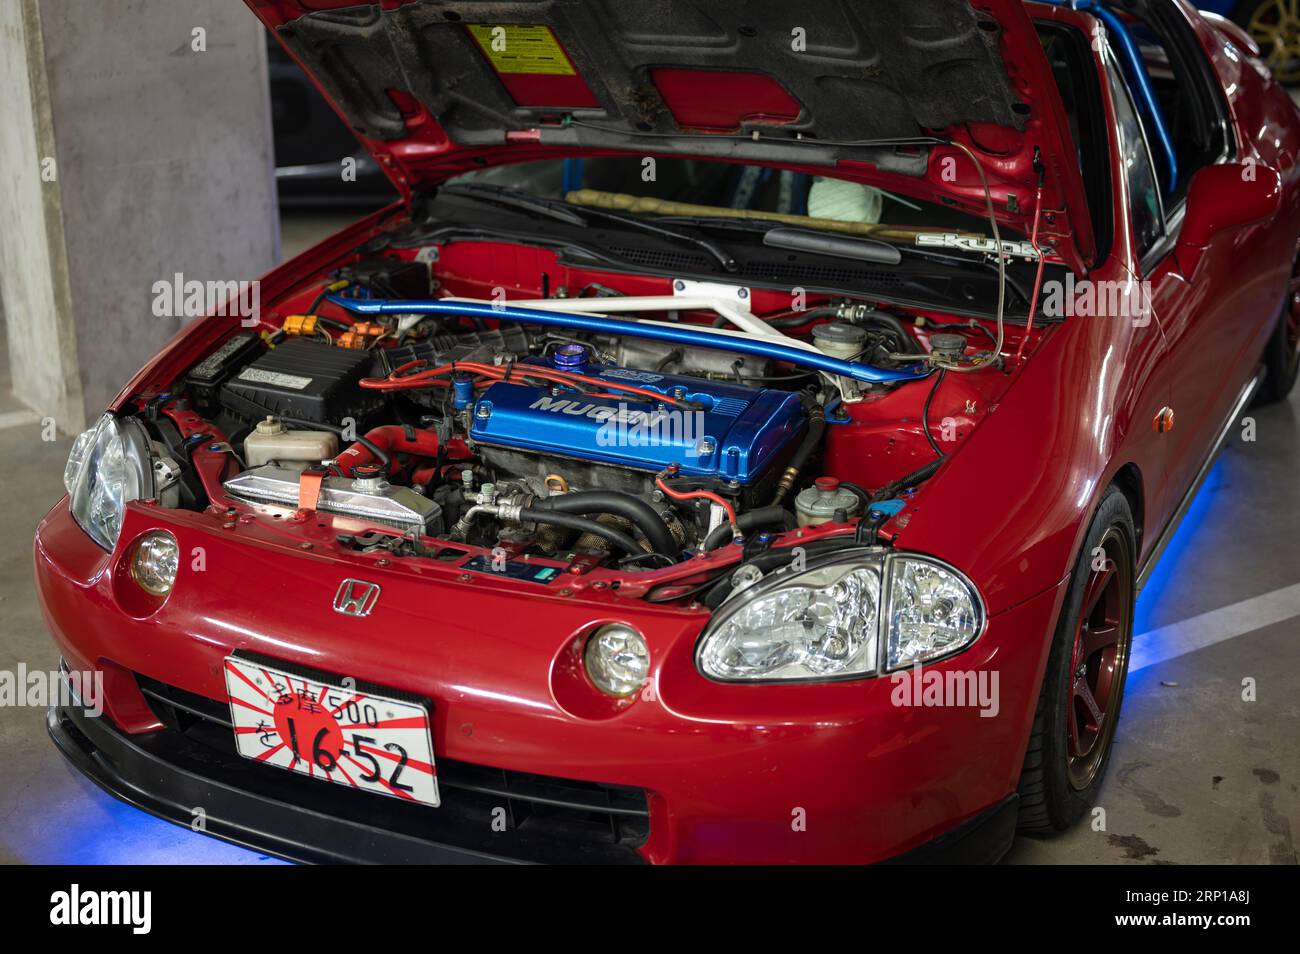 The modified Mugen engine of the red Honda CR-X Del Sol parked in the parking lot Stock Photo